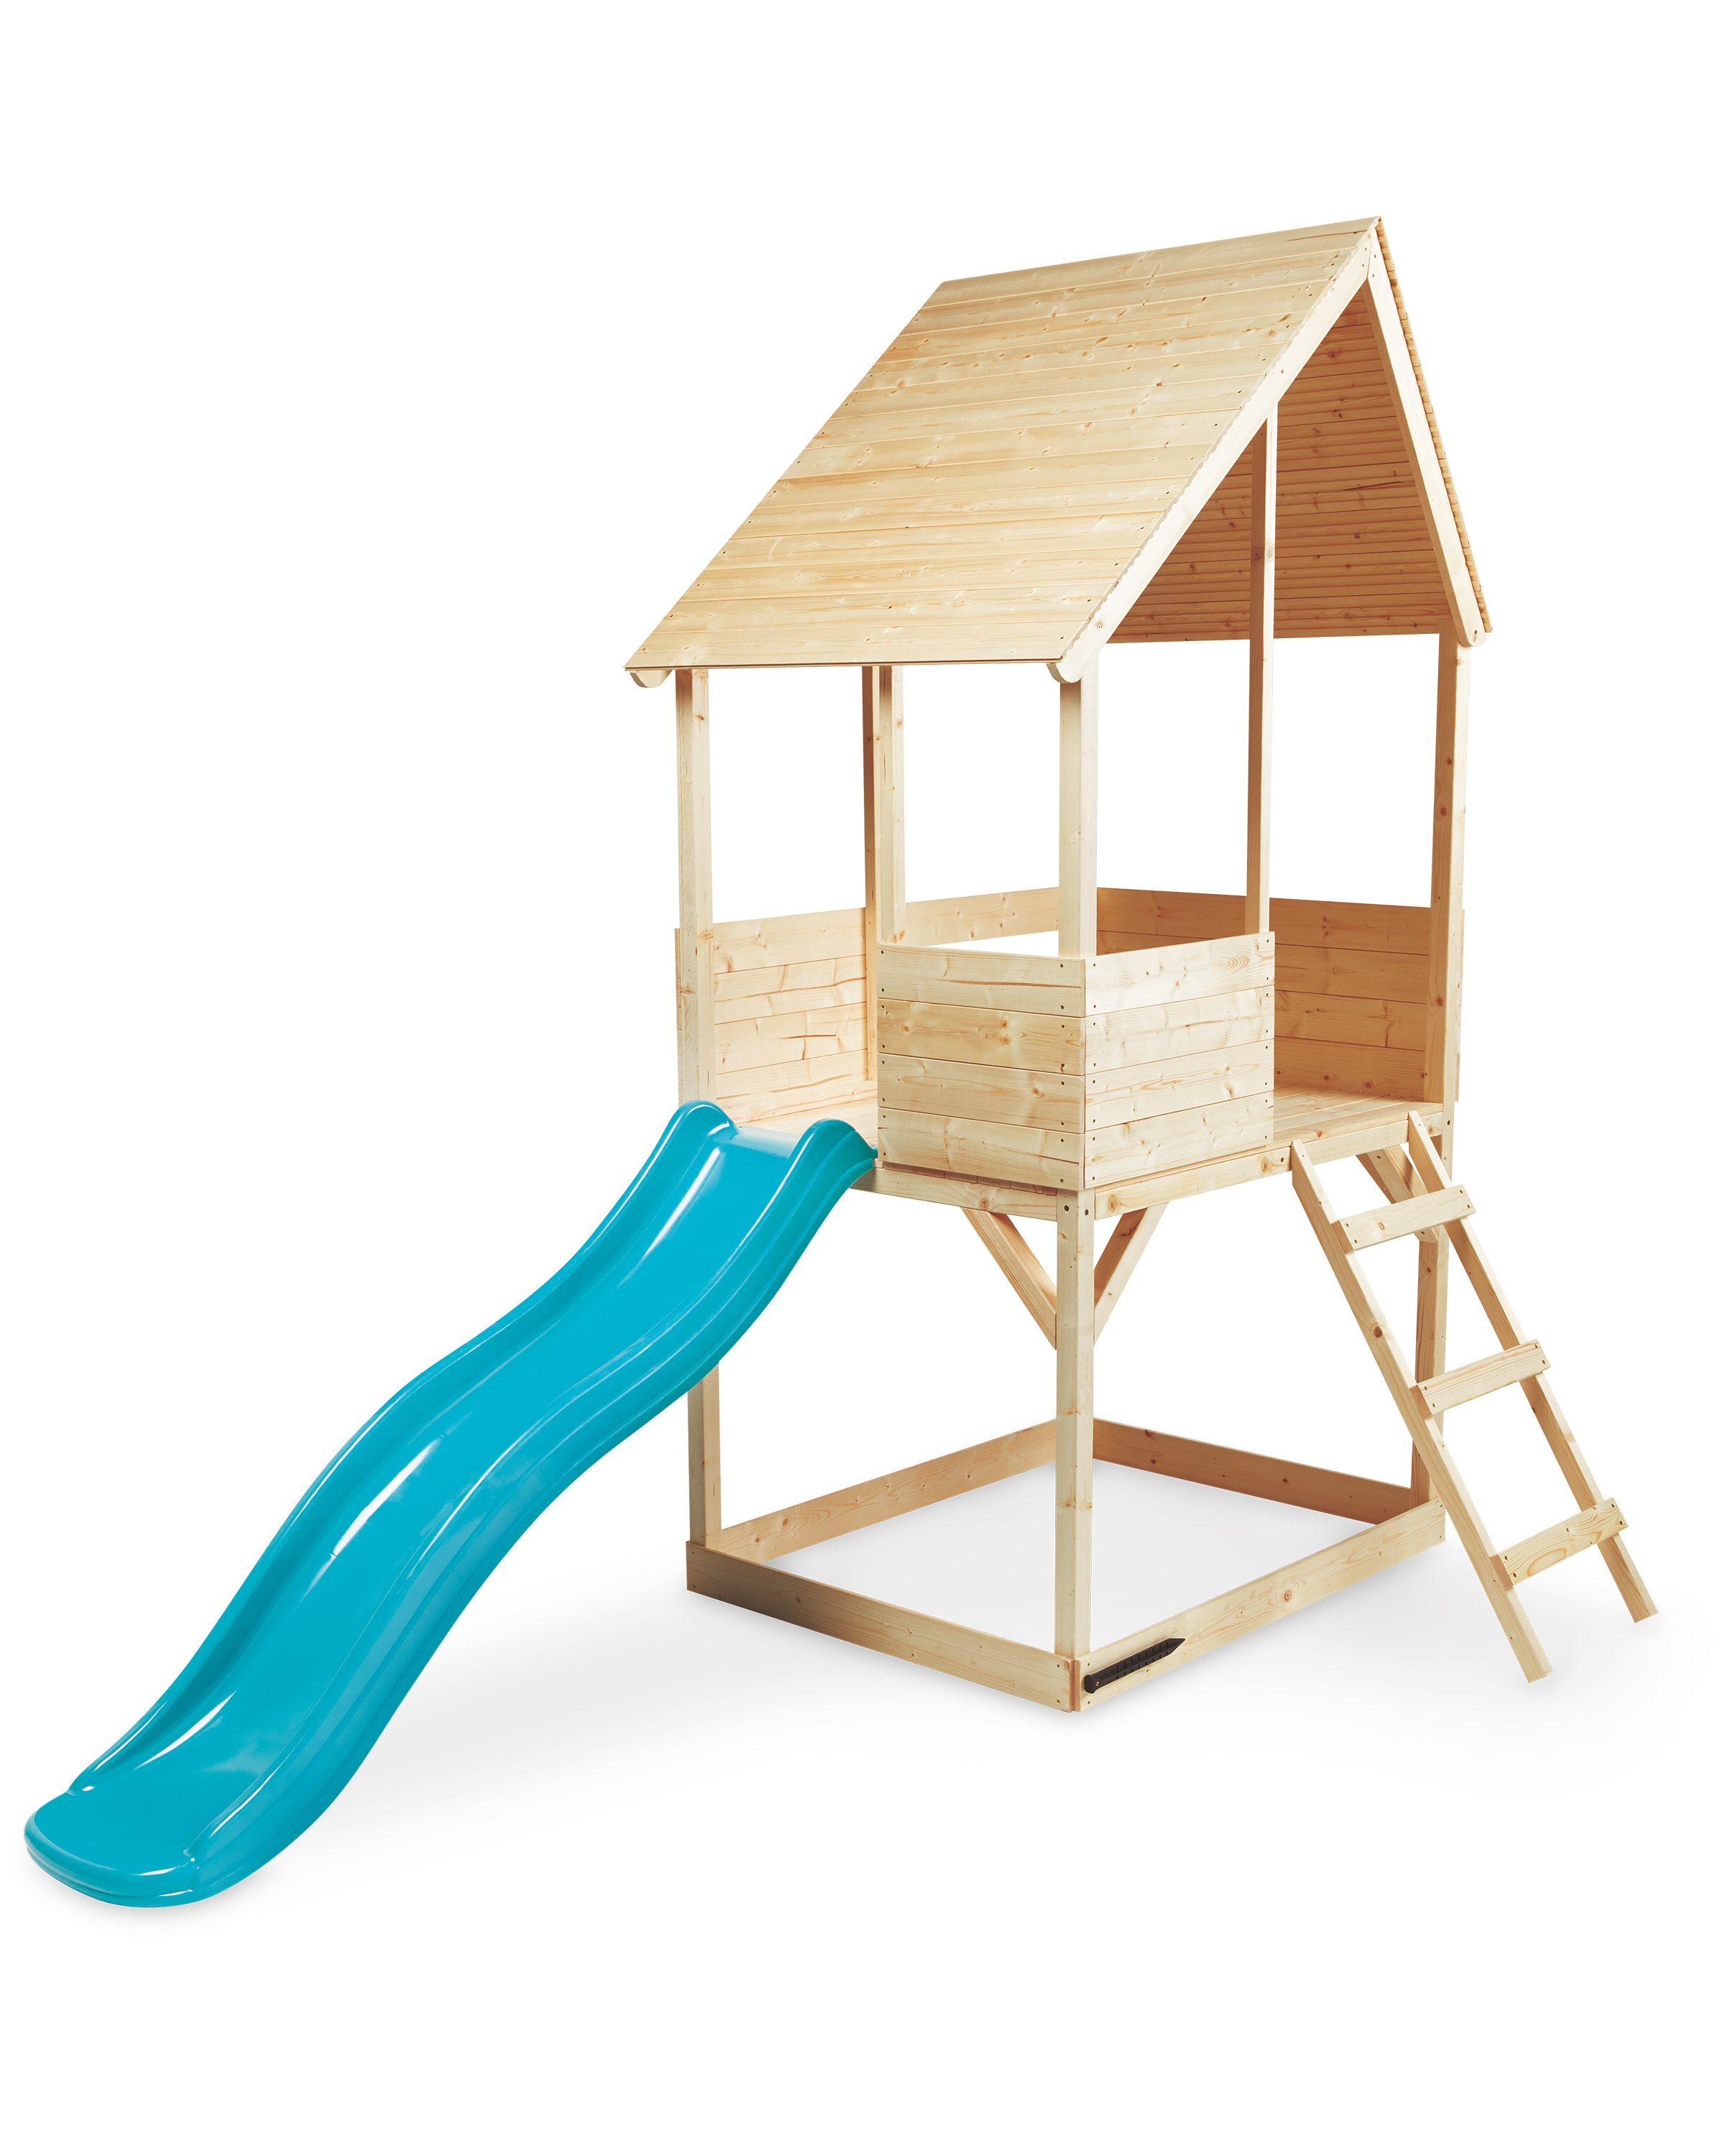 Kids Wooden Playhouse With Slide Aldi Uk, Small Wooden Playhouse With Slide